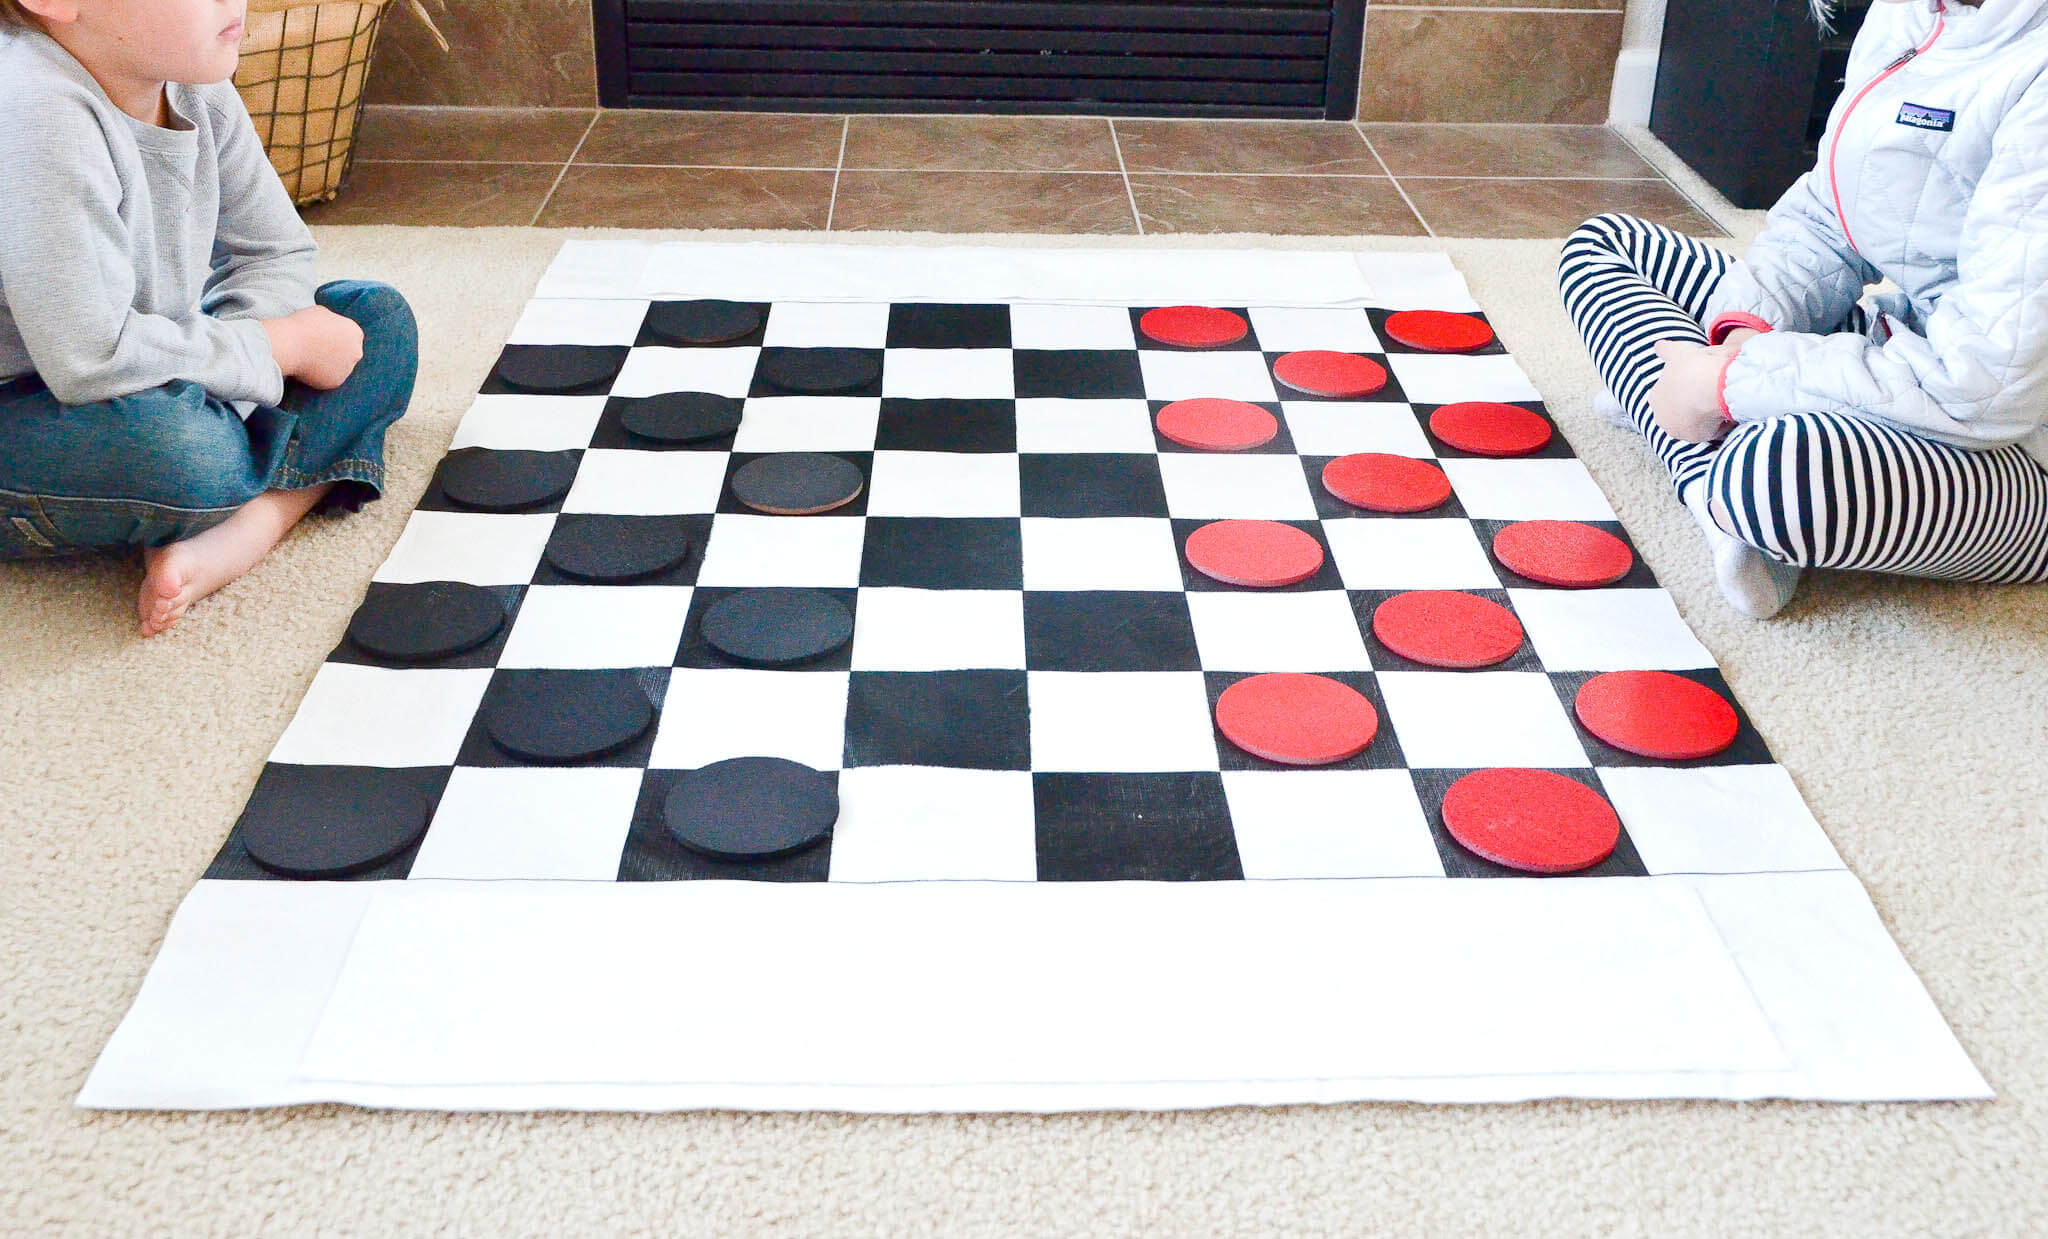 Classic & Creative Checkerboard Game Craft With Cardboard, Coaster, Tablecloth & Paint